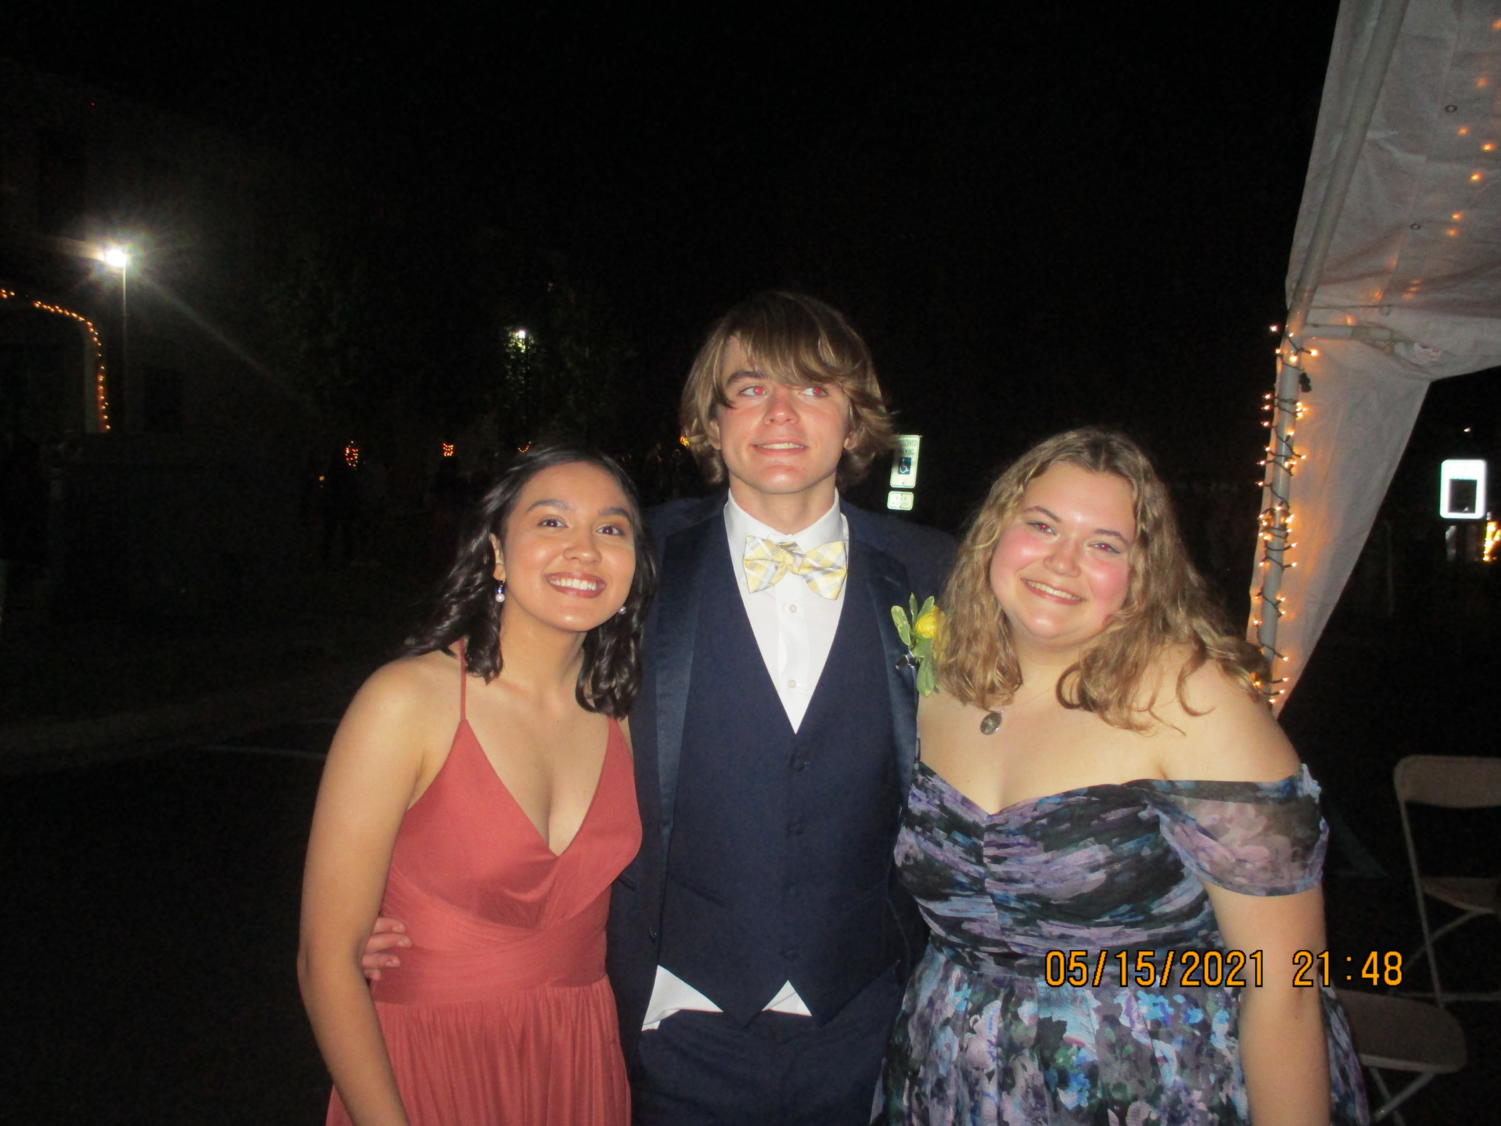 Pictures+from+Prom+2021%21